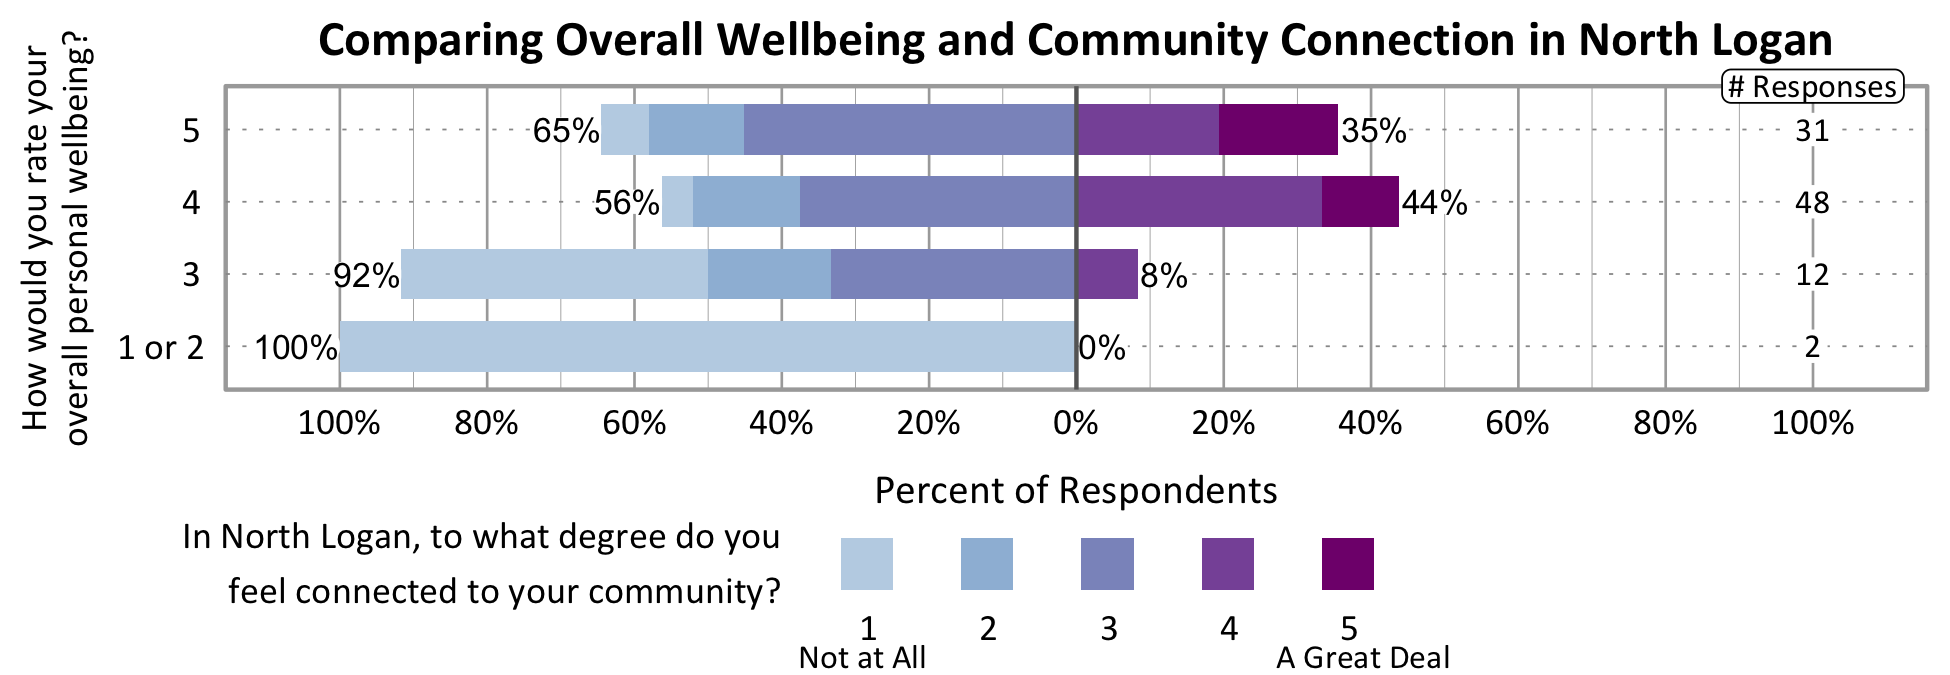 Likert Graph. Title: Comparing Overall Wellbeing and Community Connection in North Logan. Of the 2 respondents that rate their overall personal wellbeing as a 1 or 2, 100% indicate a community connection score of 1, 2, or 3 while 0% indicate a community connection score of 4 or 5. Of the 12 respondents that rate their overall personal wellbeing as a 3, 92% indicate a community connection score of 1, 2, or 3 while 8% indicate a community connection score of 4 or 5. Of the 48 respondents that rate their overall personal wellbeing as a 4, 56% indicate a community connection score of 1, 2, or 3 while 44% indicate a community connection score of 4 or 5. Of the 31 participants that rate their overall wellbeing as a 5, 65% indicate a community connection score of 1, 2, or 3 while 35% indicate a community connection score of 4 or 5.